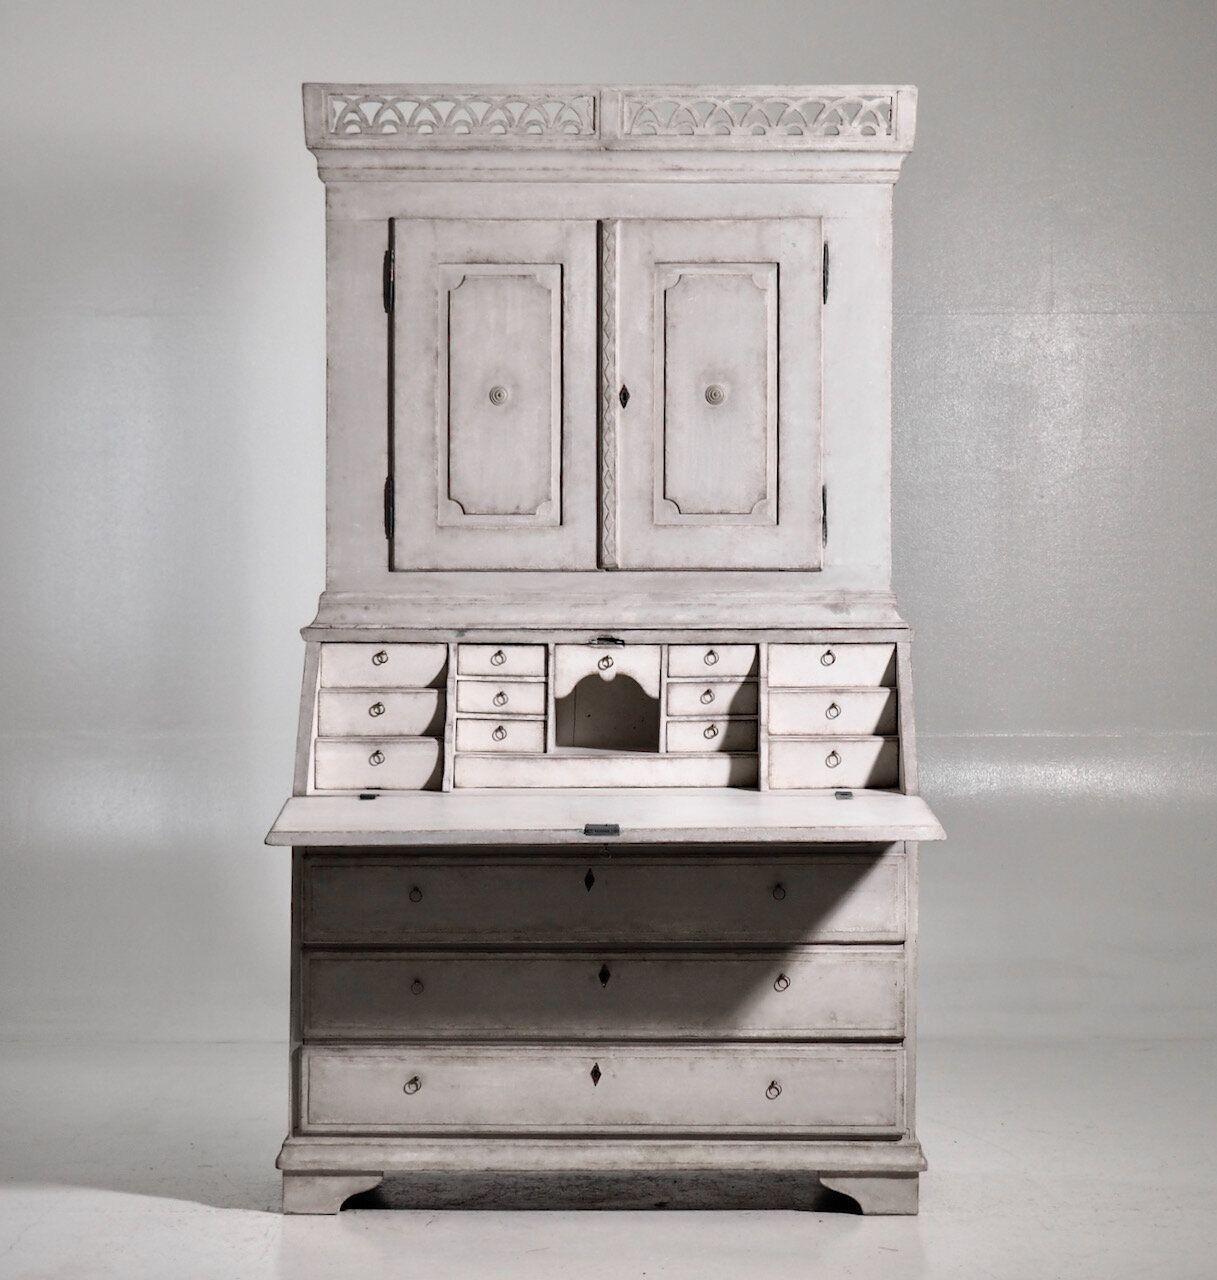 This is a beautiful Swedish secretary from the Gustavian period with a richly carved gallery, old locks and hardware. Circa 1810. The upper library has two shelves, the top shaped and slotted, behind two raised panel doors. The lower section has a